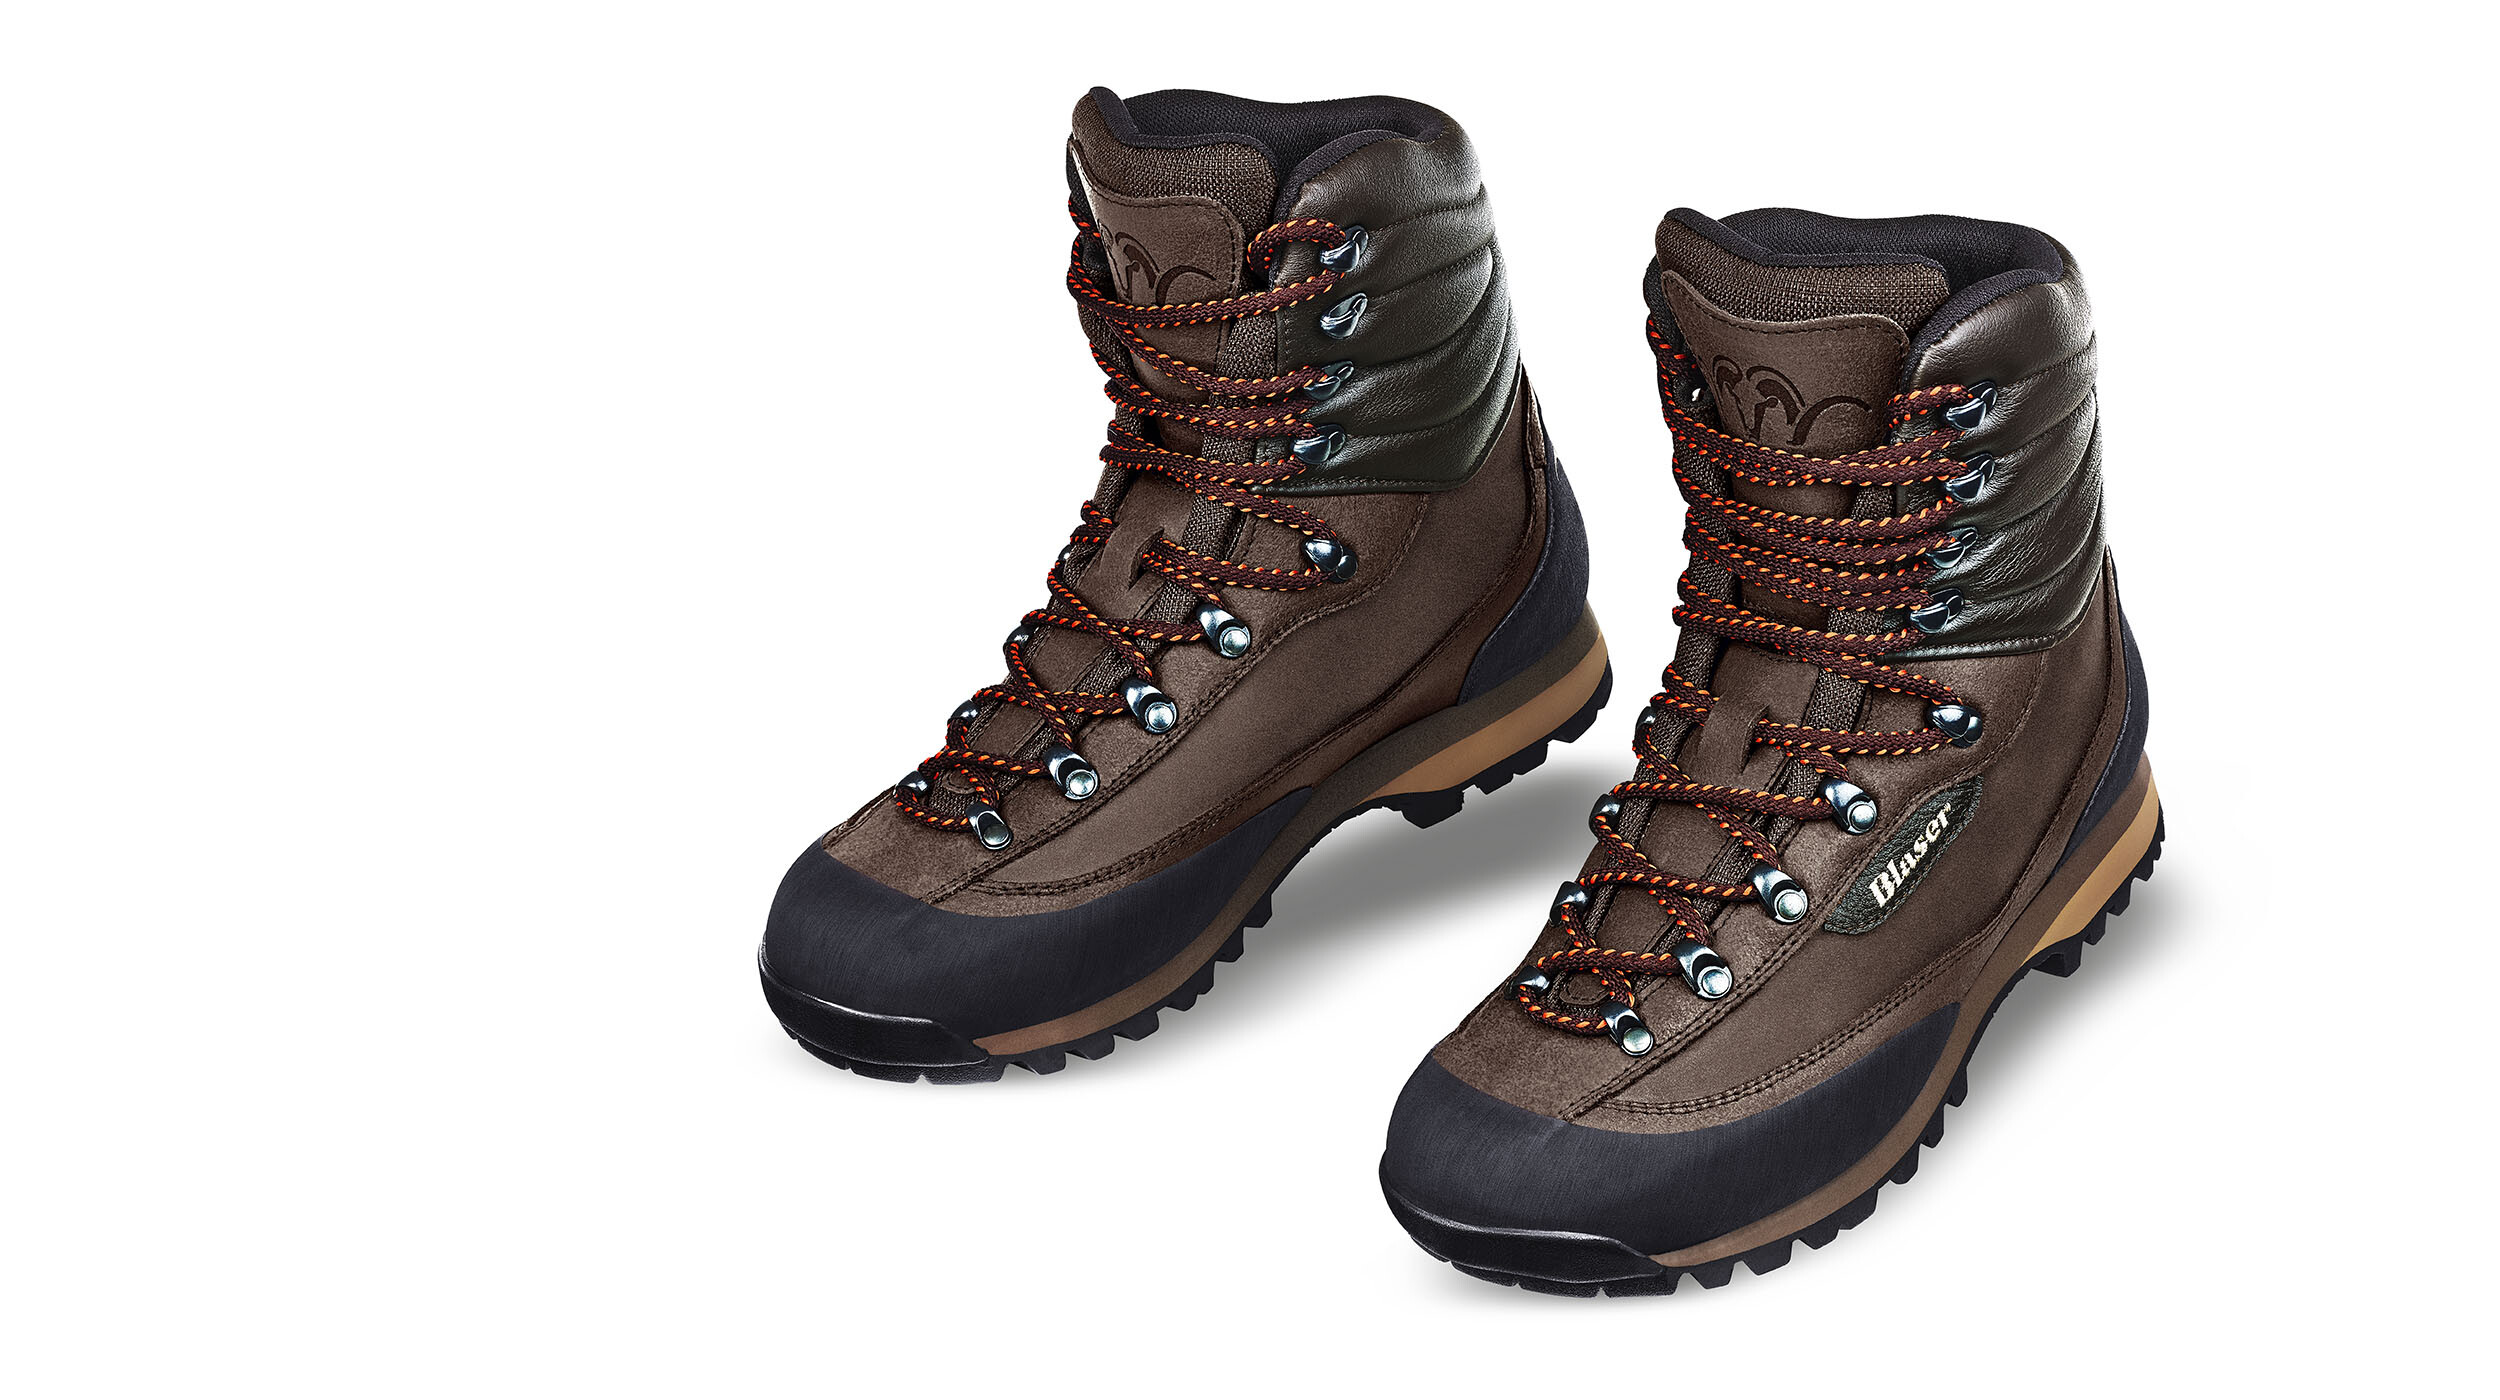 Blaser Boots All Season Stalking Boots 116130-044/615 Sporting Goods ...